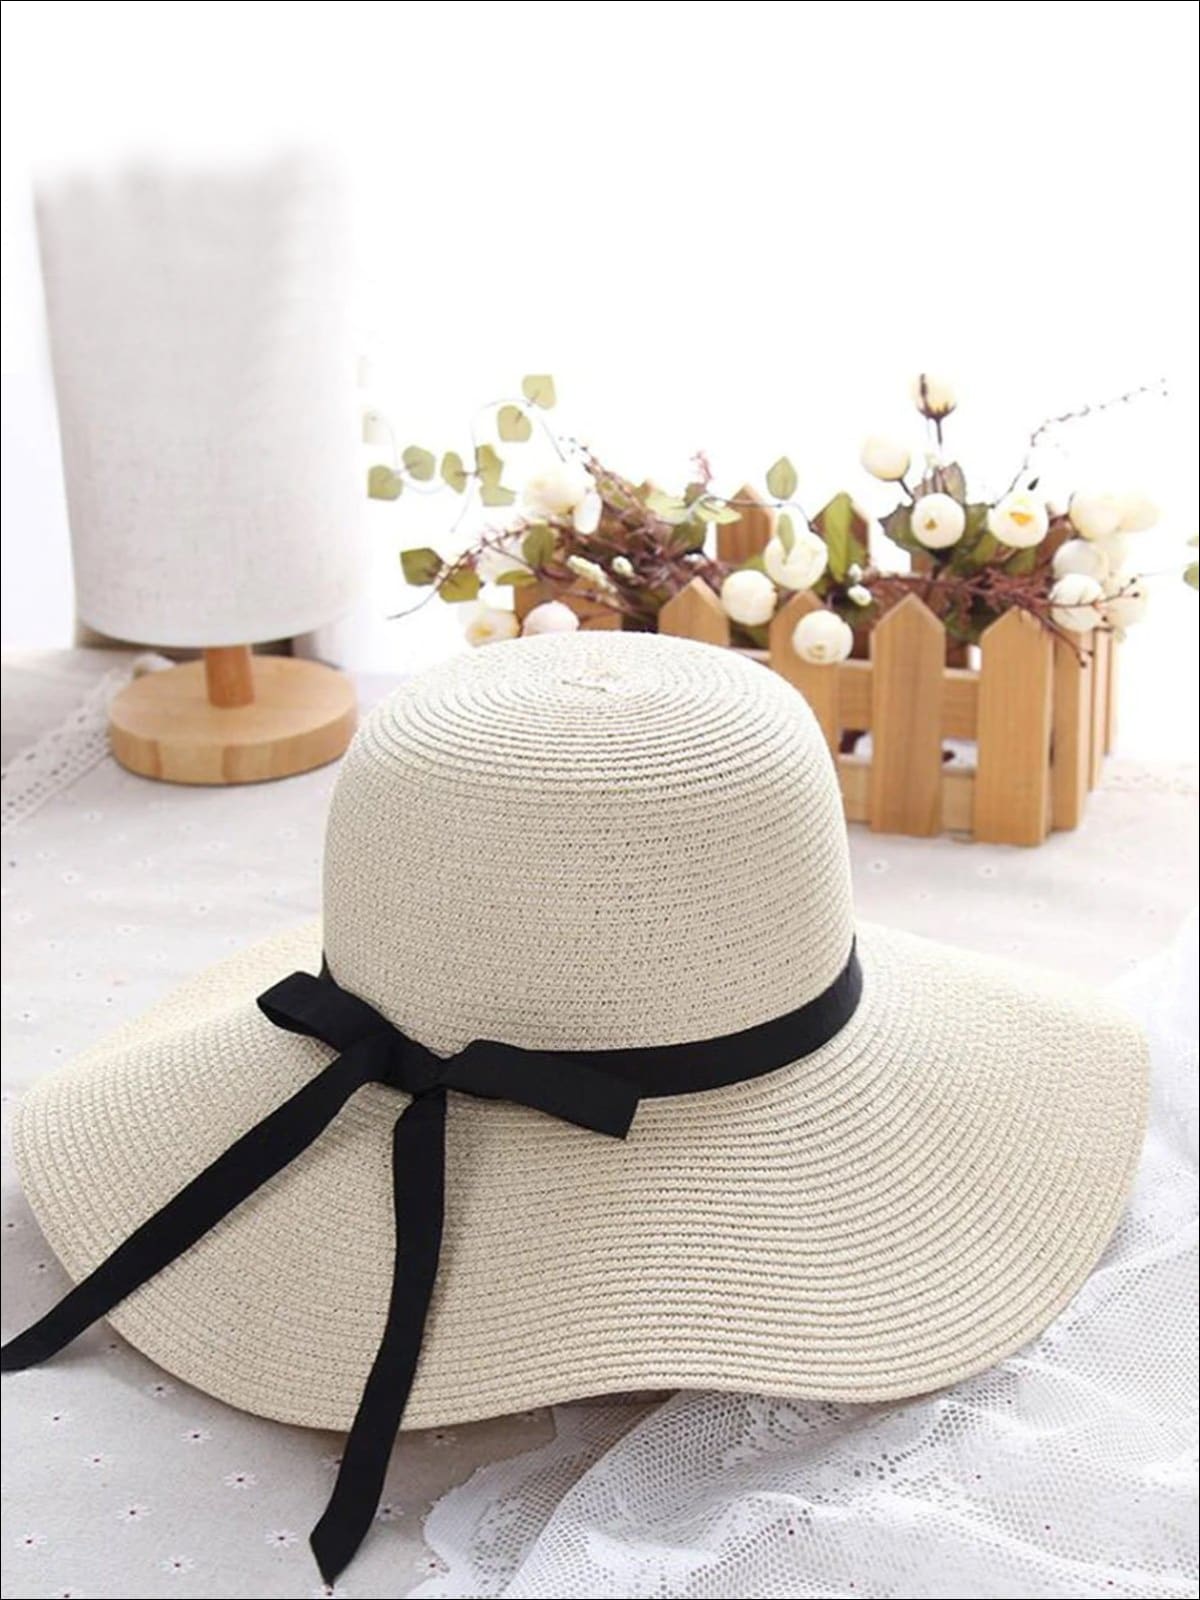 Women's Casual Straw Hat with Black Ribbon, Beige